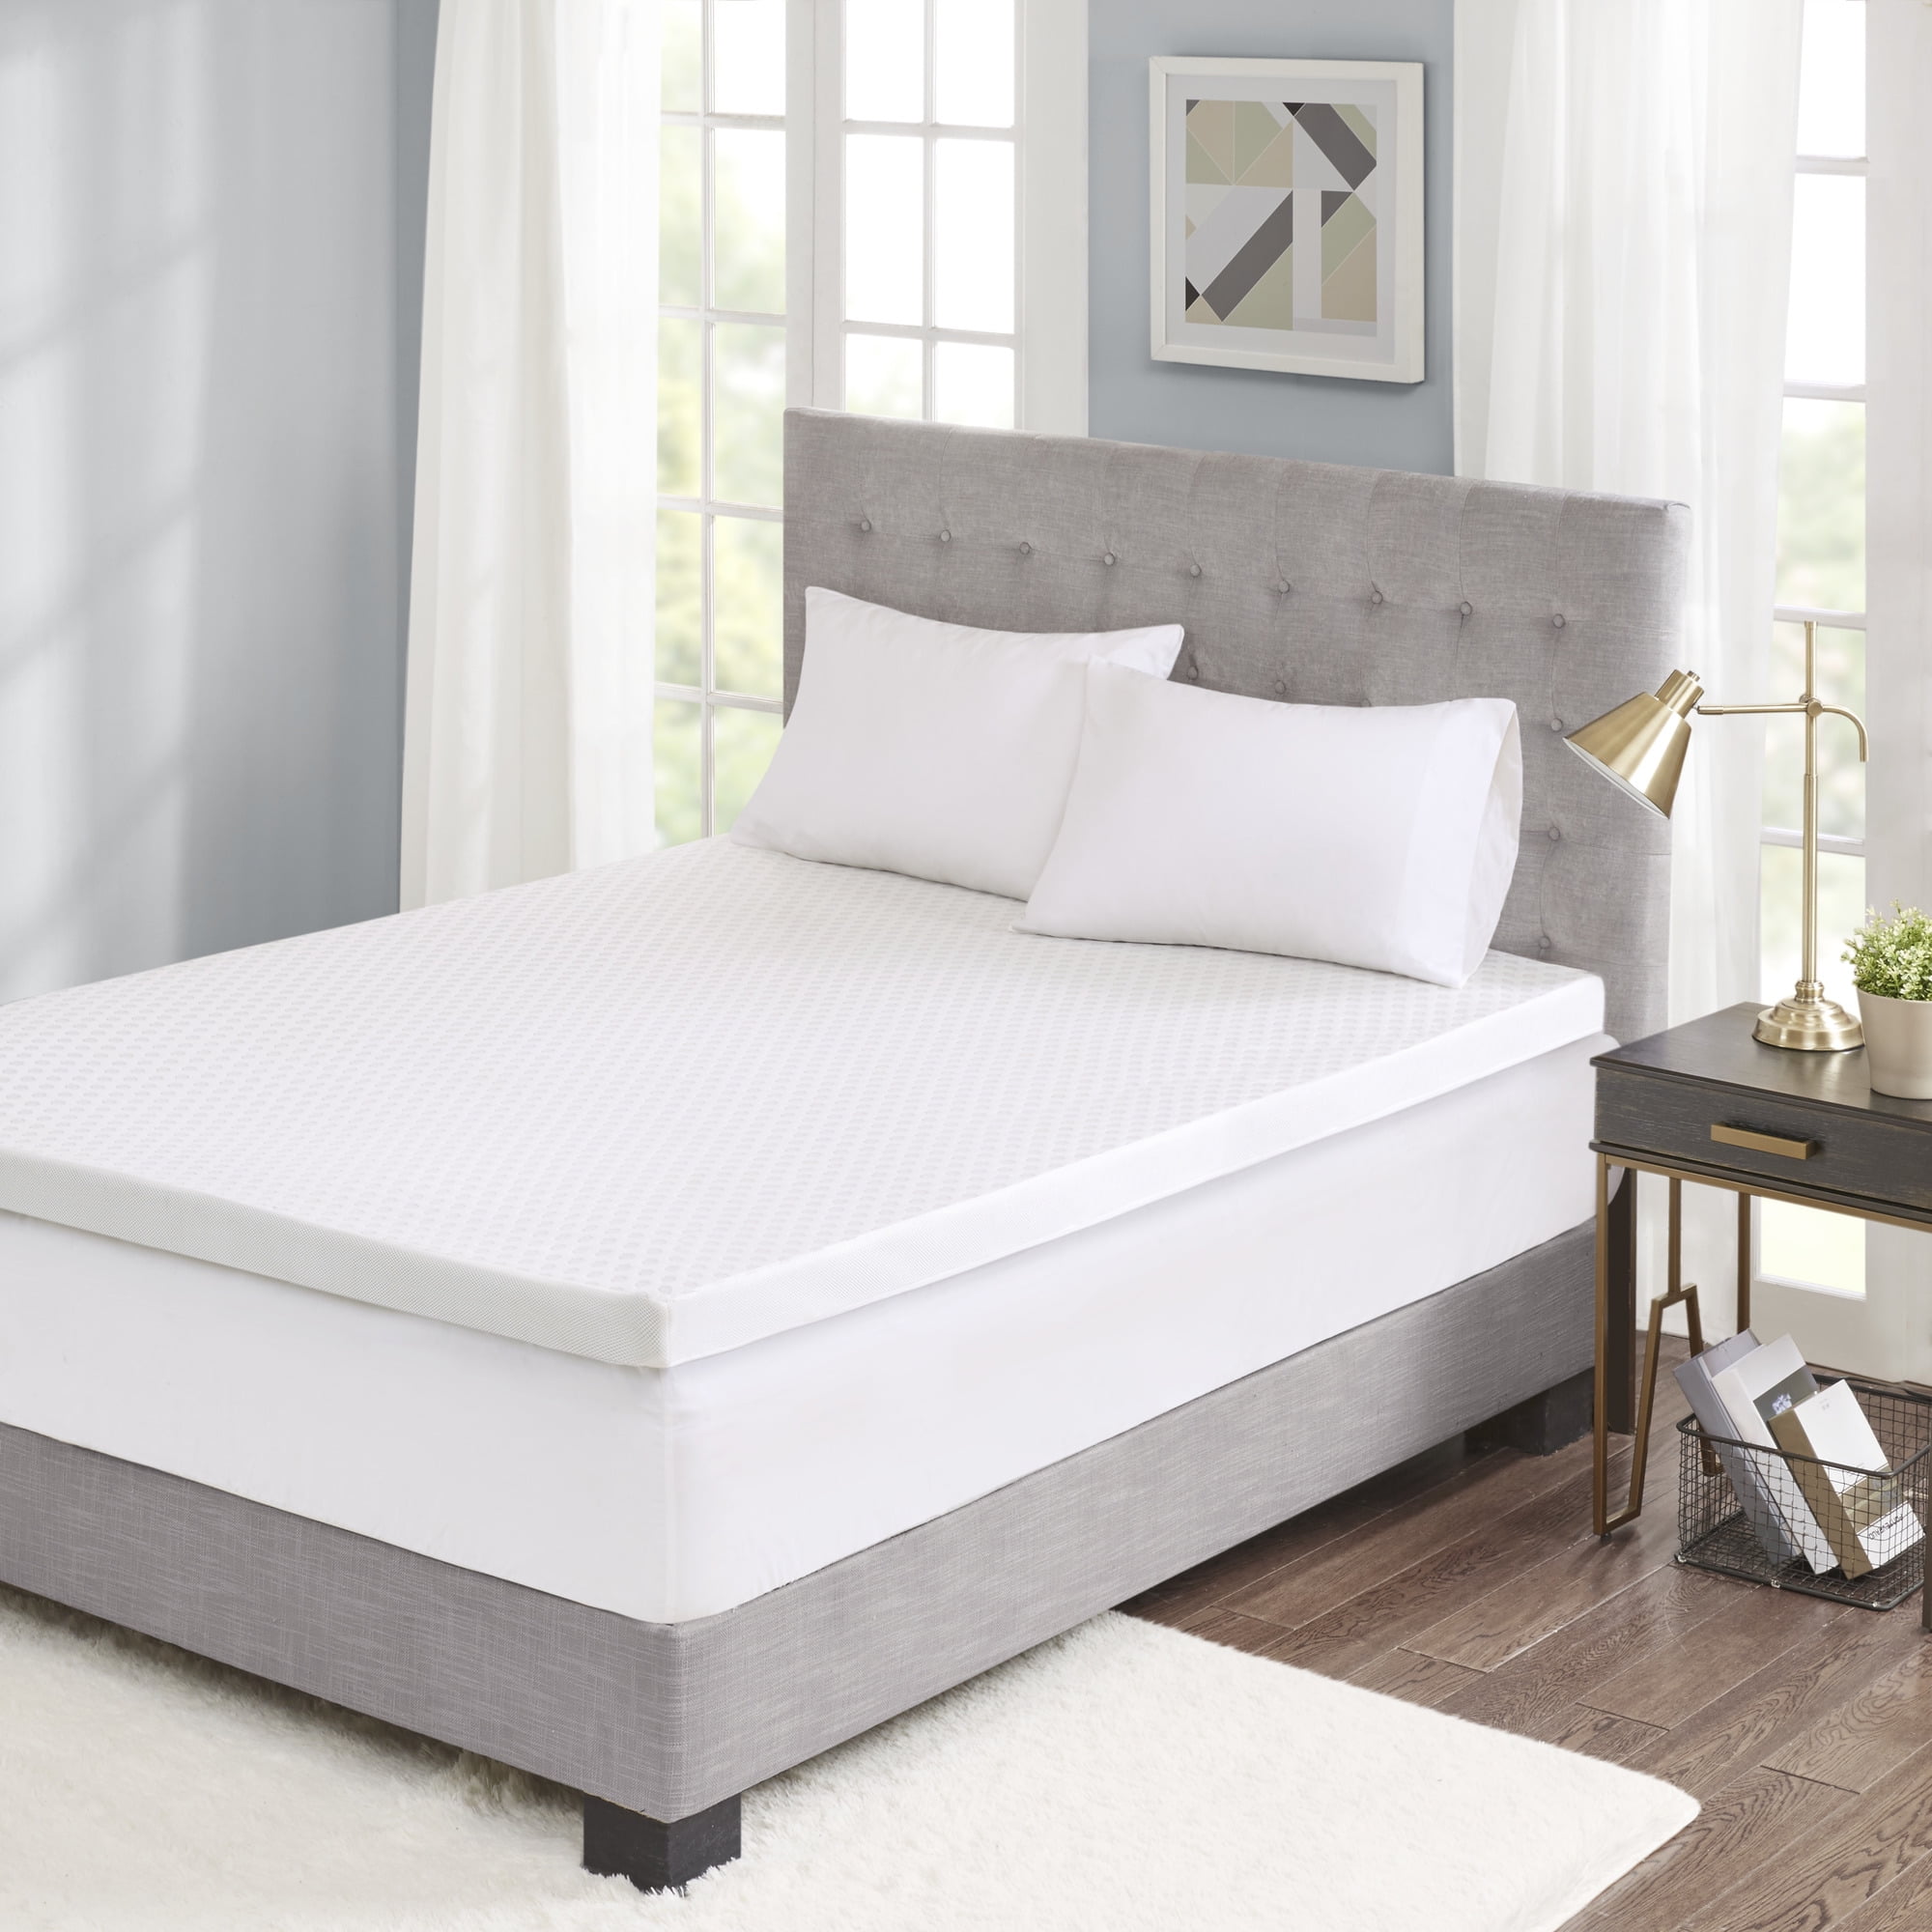 Comfort Classics 3 Gel Memory Foam Mattress Topper With Cooling Cover